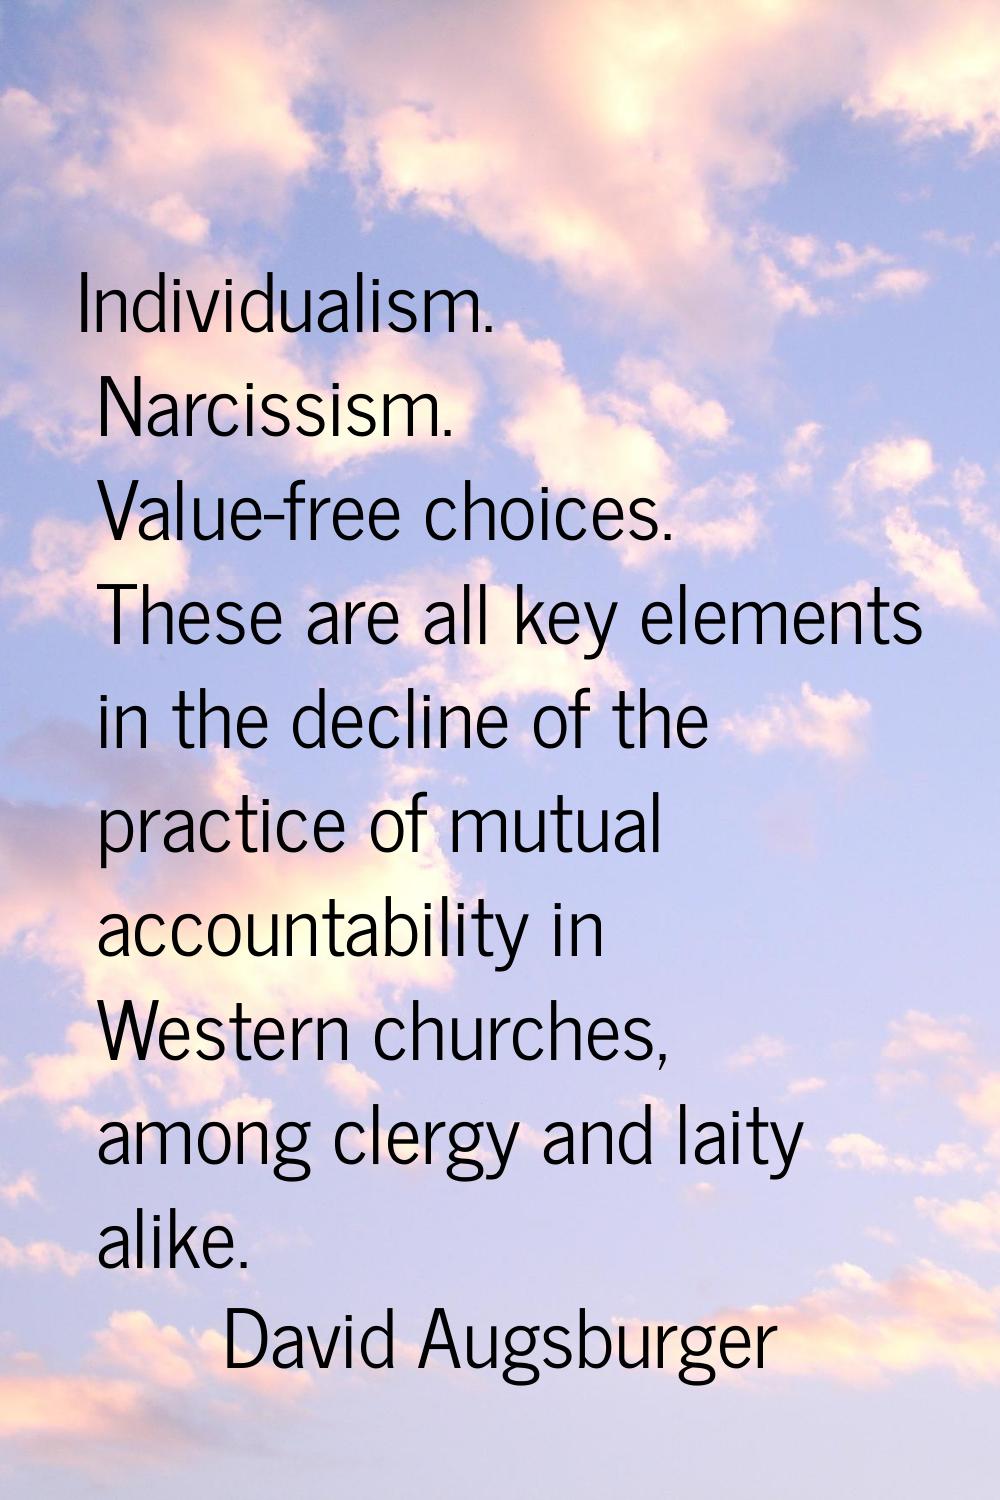 Individualism. Narcissism. Value-free choices. These are all key elements in the decline of the pra